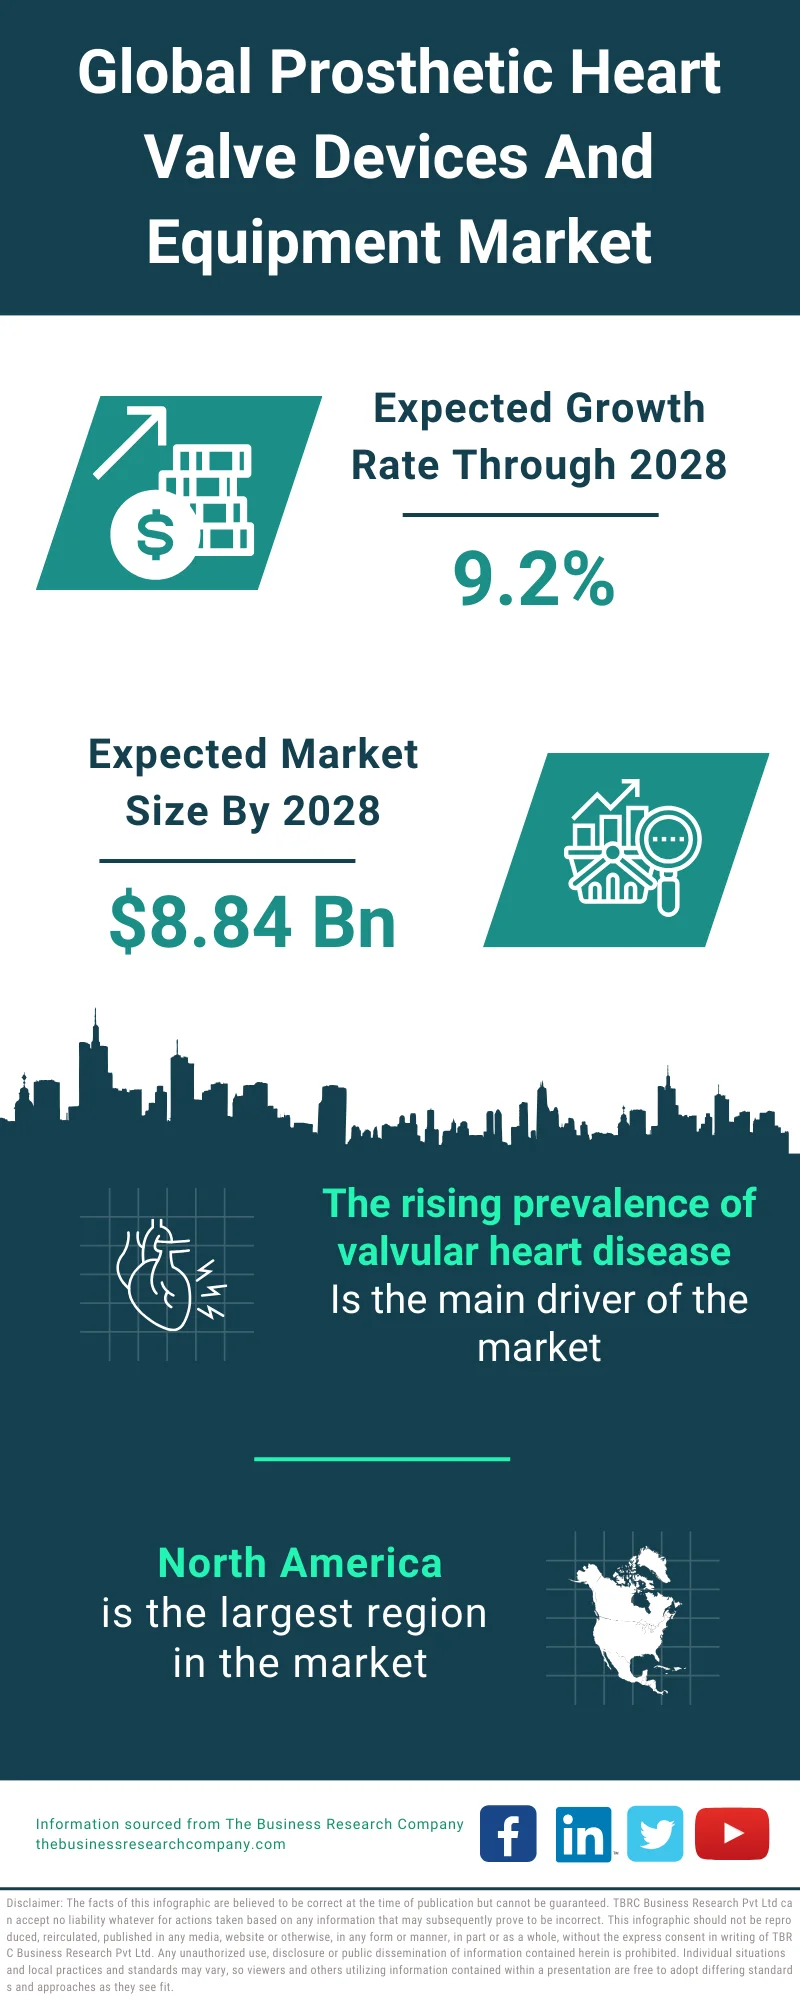 Prosthetic Heart Valve Devices And Equipment Market